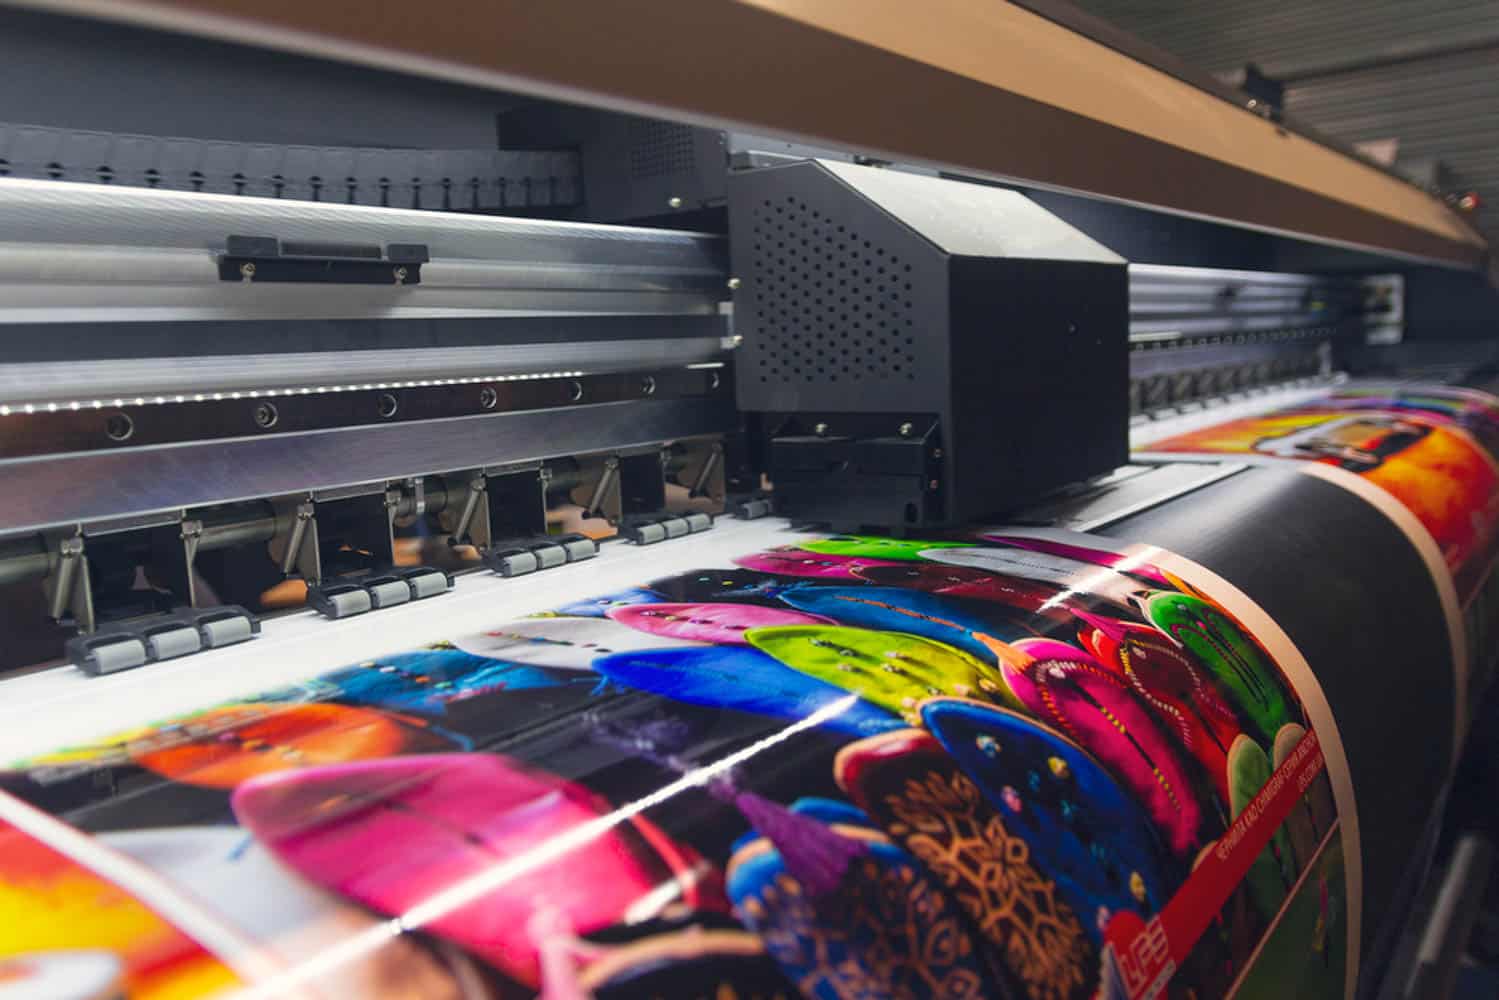 How Does Inkjet Printer Work? A Detailed Guide With Steps 